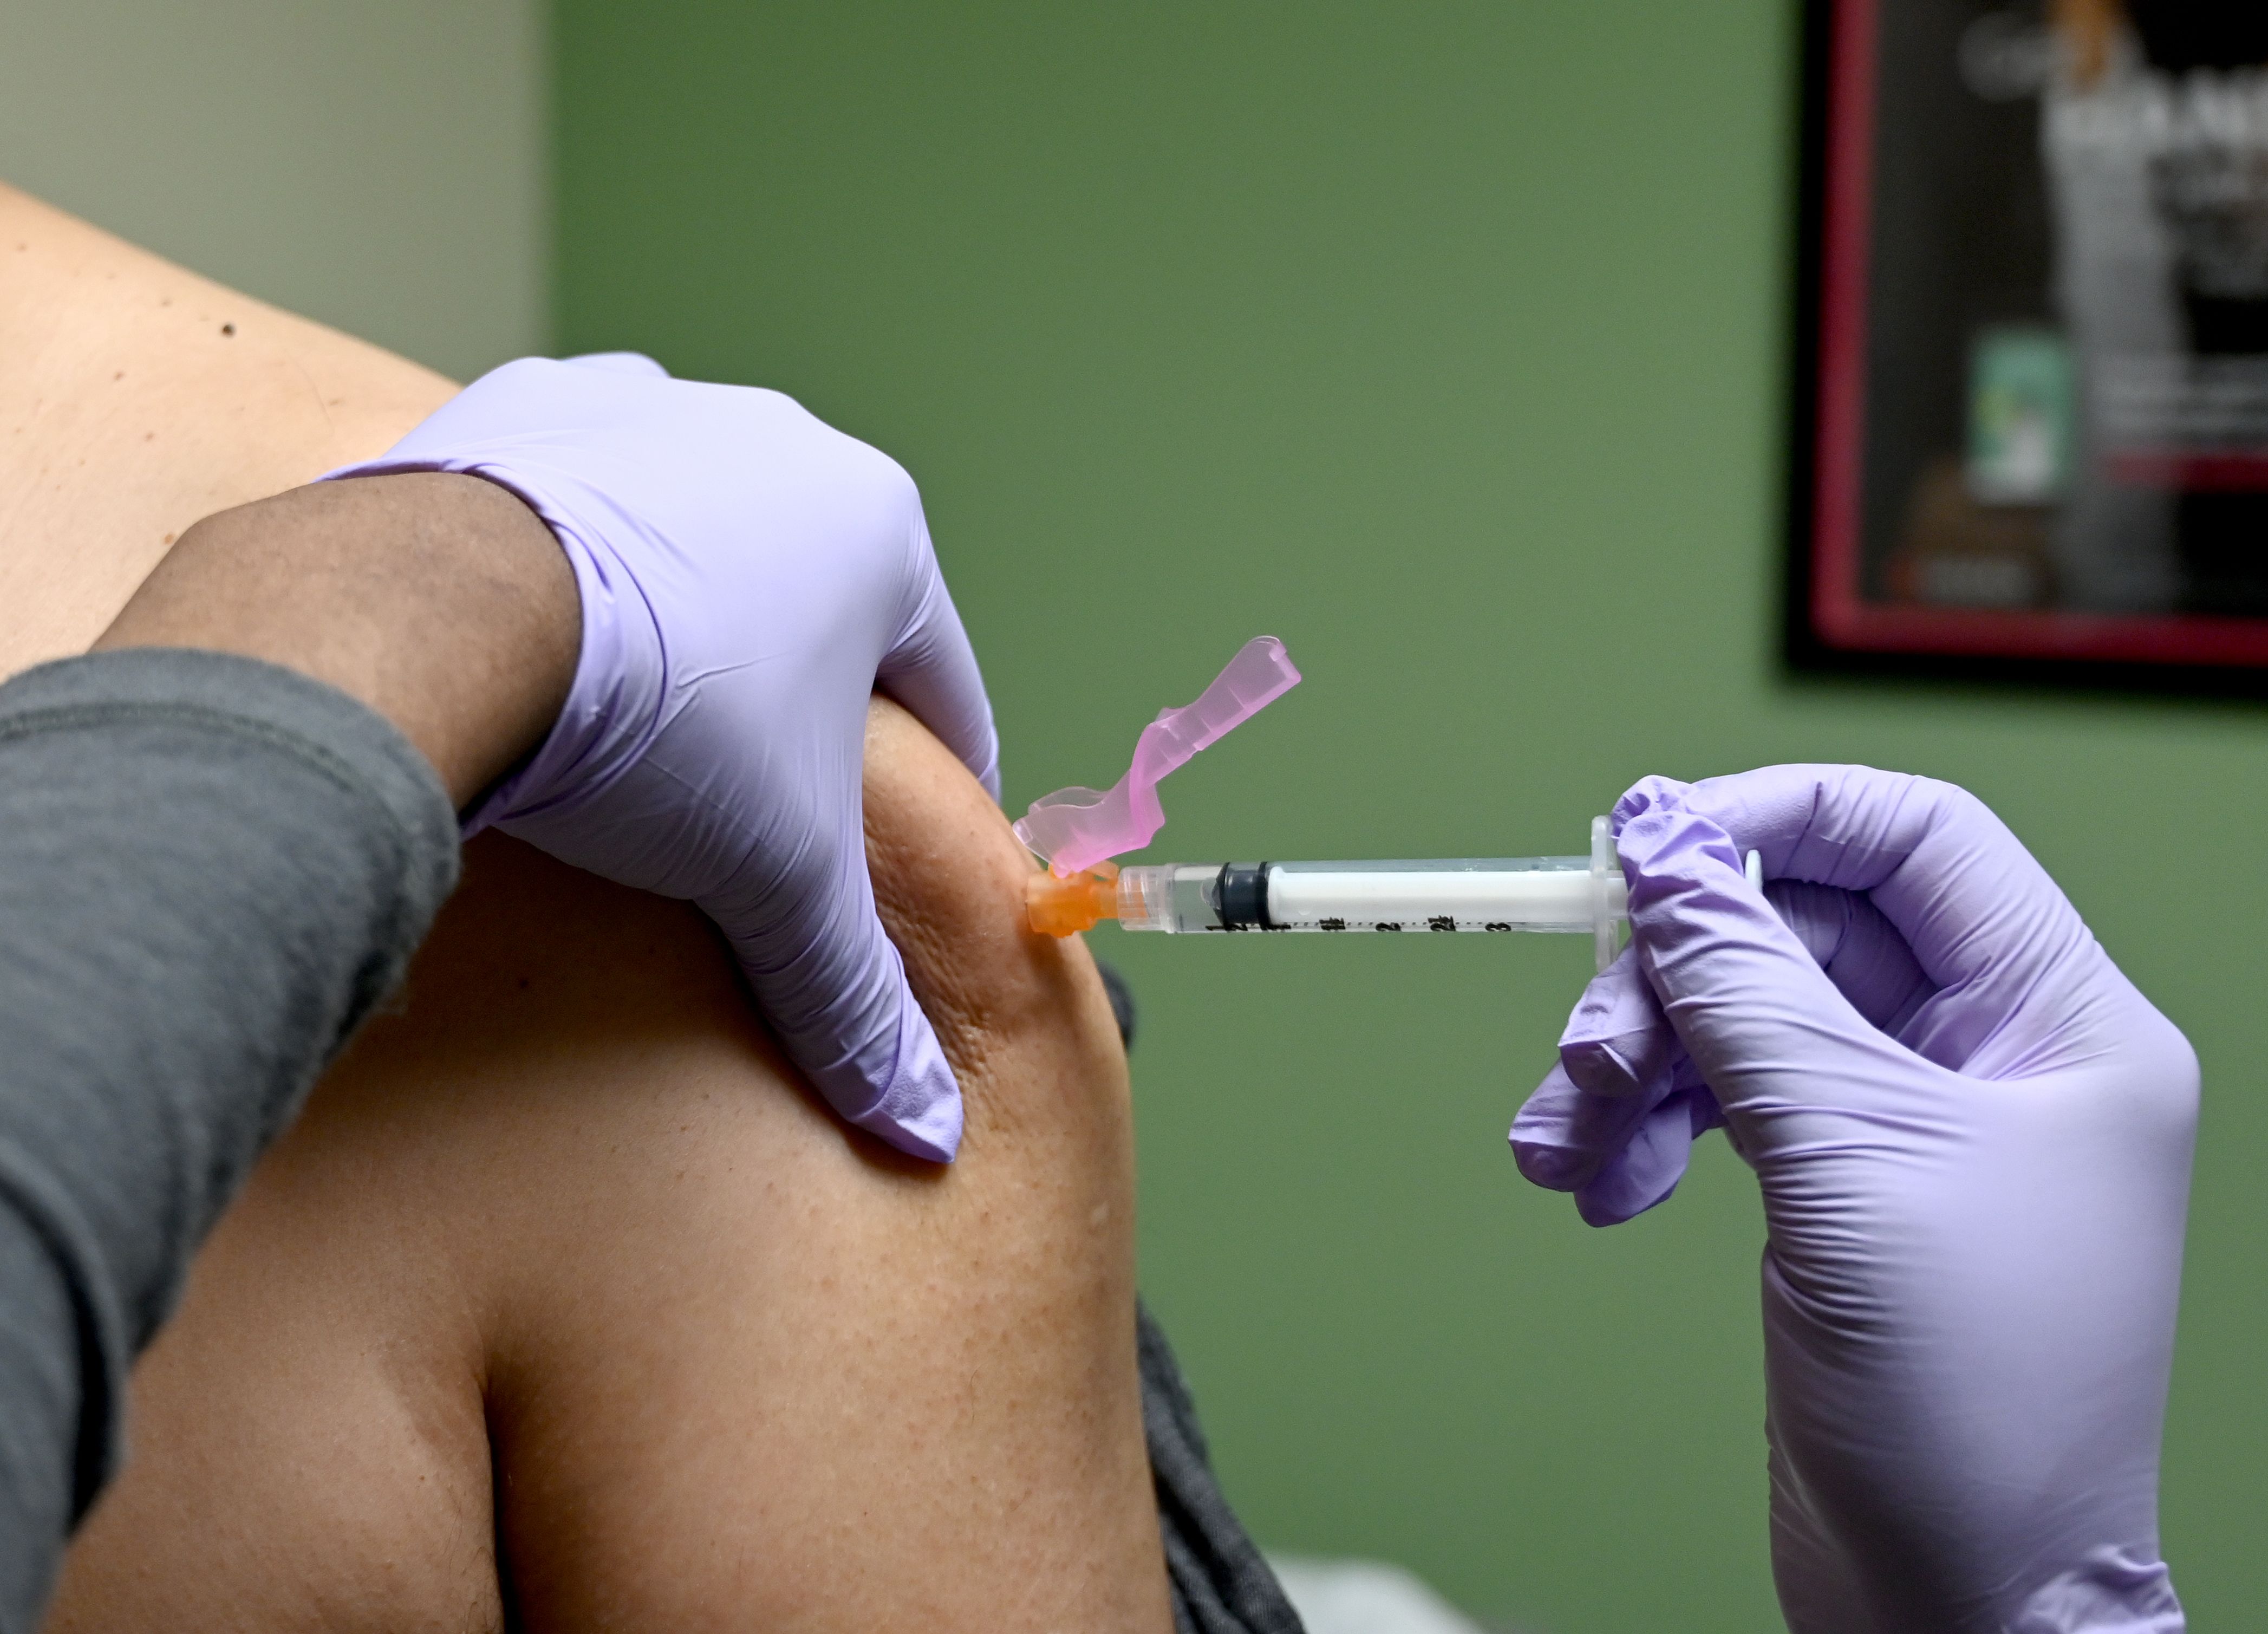 A person gets a flu shot in Washington, DC, on January 31.